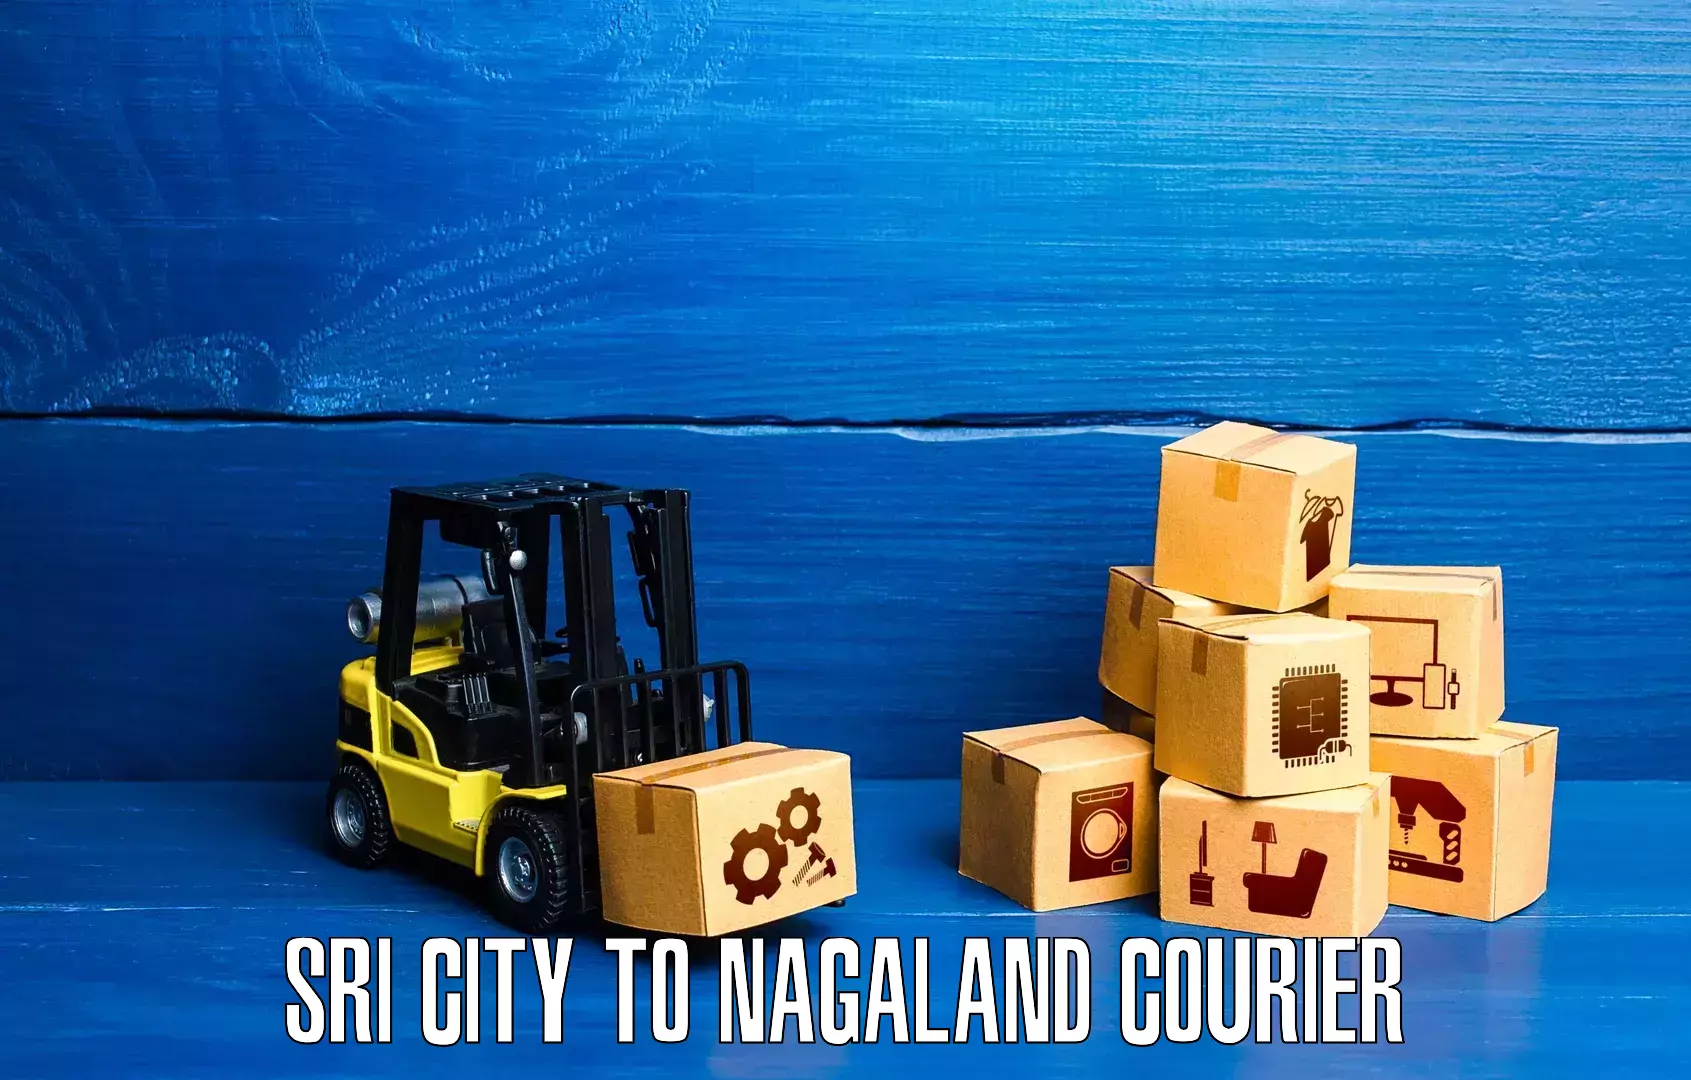 Package tracking in Sri City to Nagaland